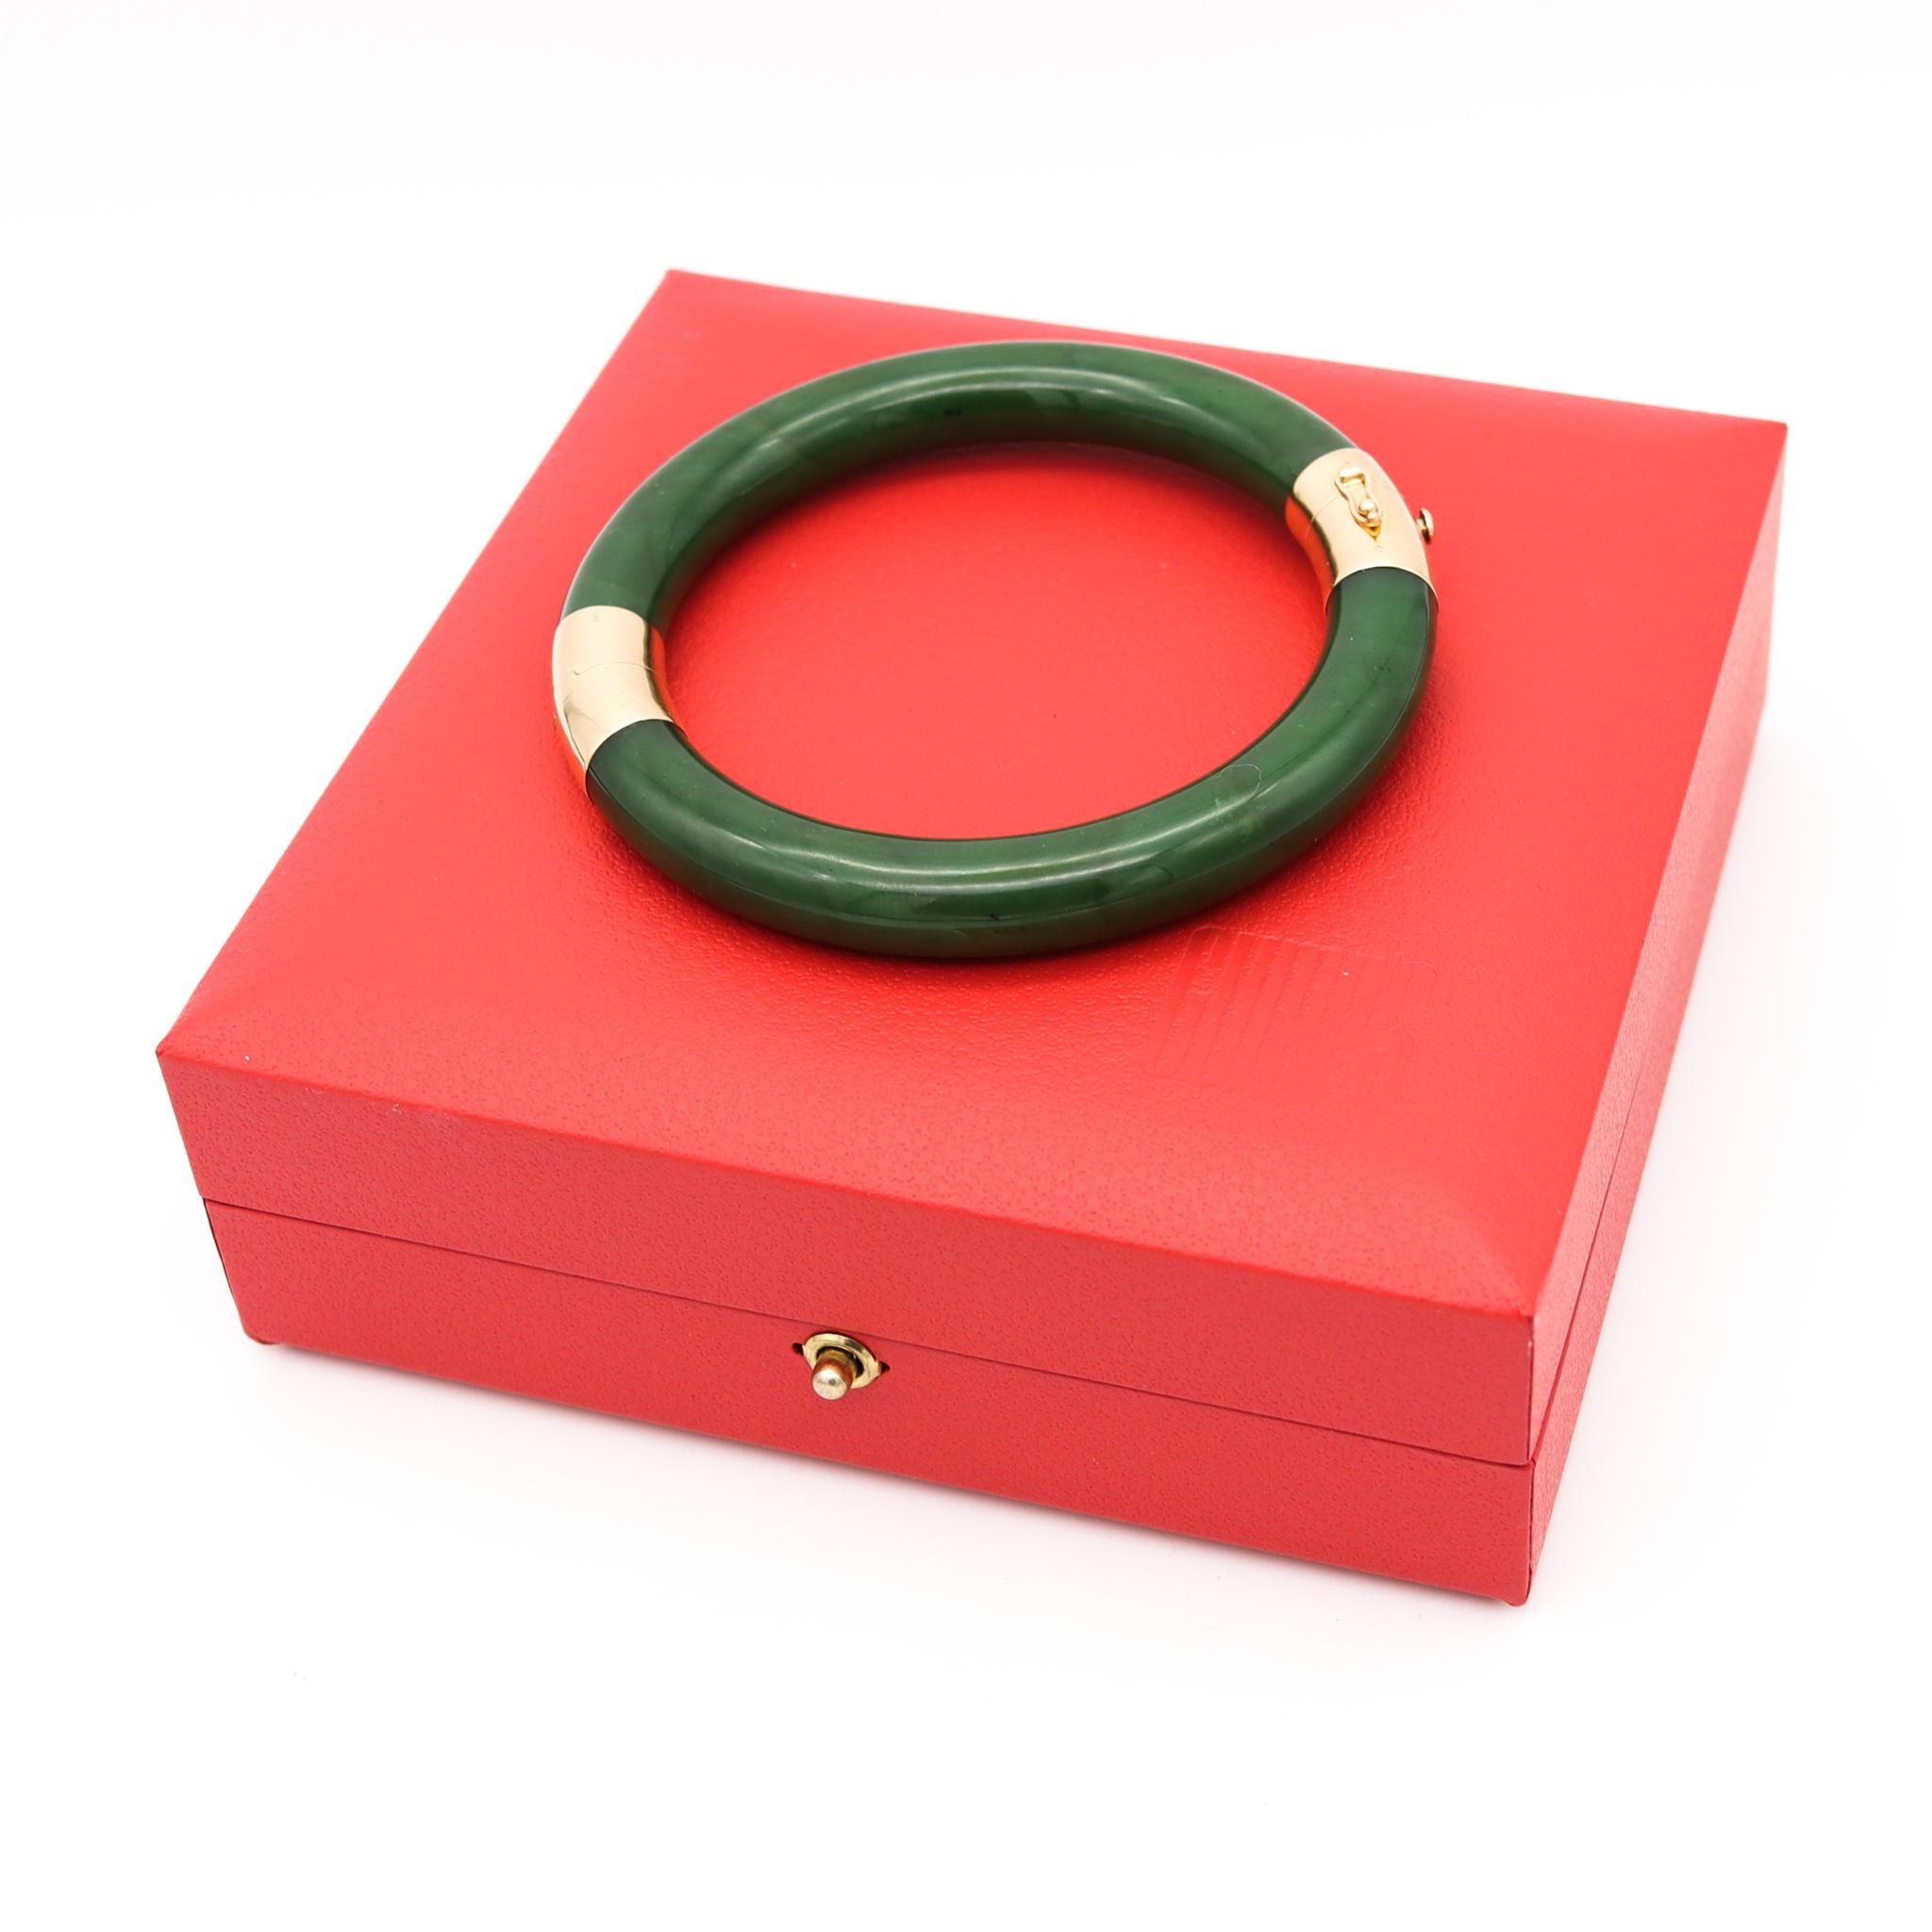 Green nephrite jade bracelet retailed by Gump's.

Beautiful vintage piece made by the iconic luxury store known as Gump's in San Francisco. This bangle bracelet was crafted with a pair of curved carvings of natural non dyed green nephrite jade and